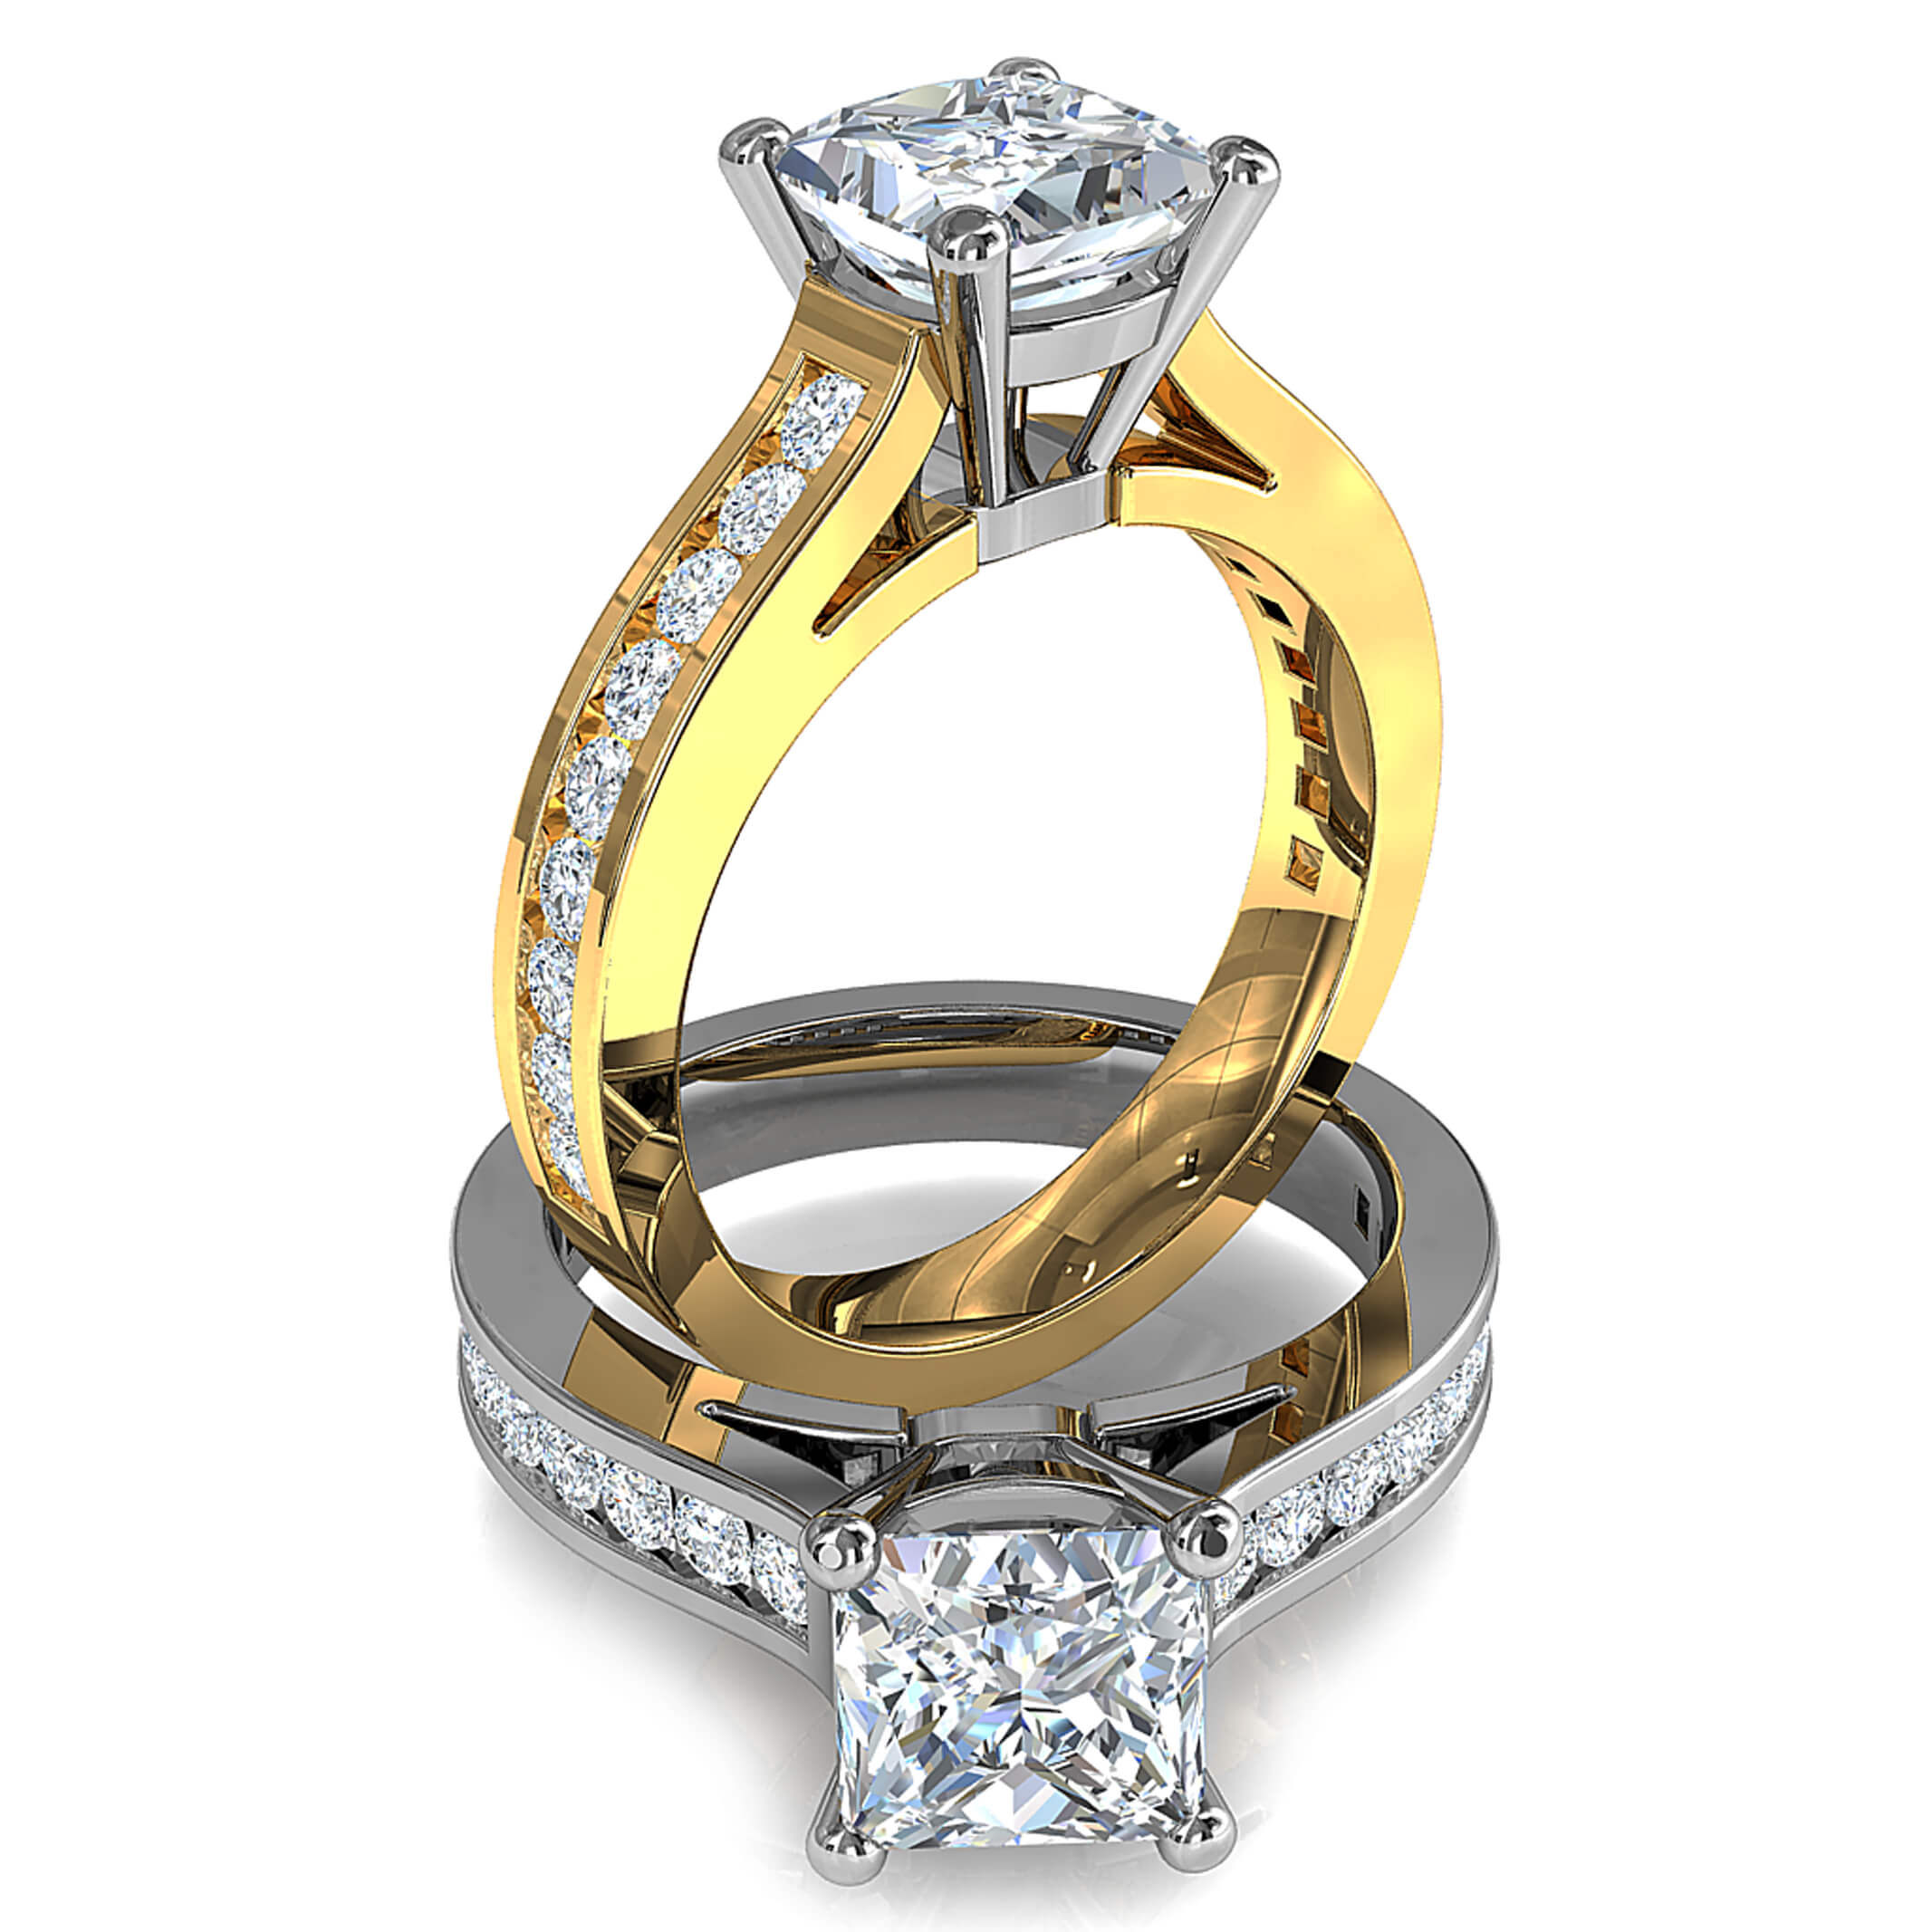 Princess Cut Solitaire Diamond Engagement Ring, 4 Claw Set on a Round Channel Set Band with Classic Underrail Setting.